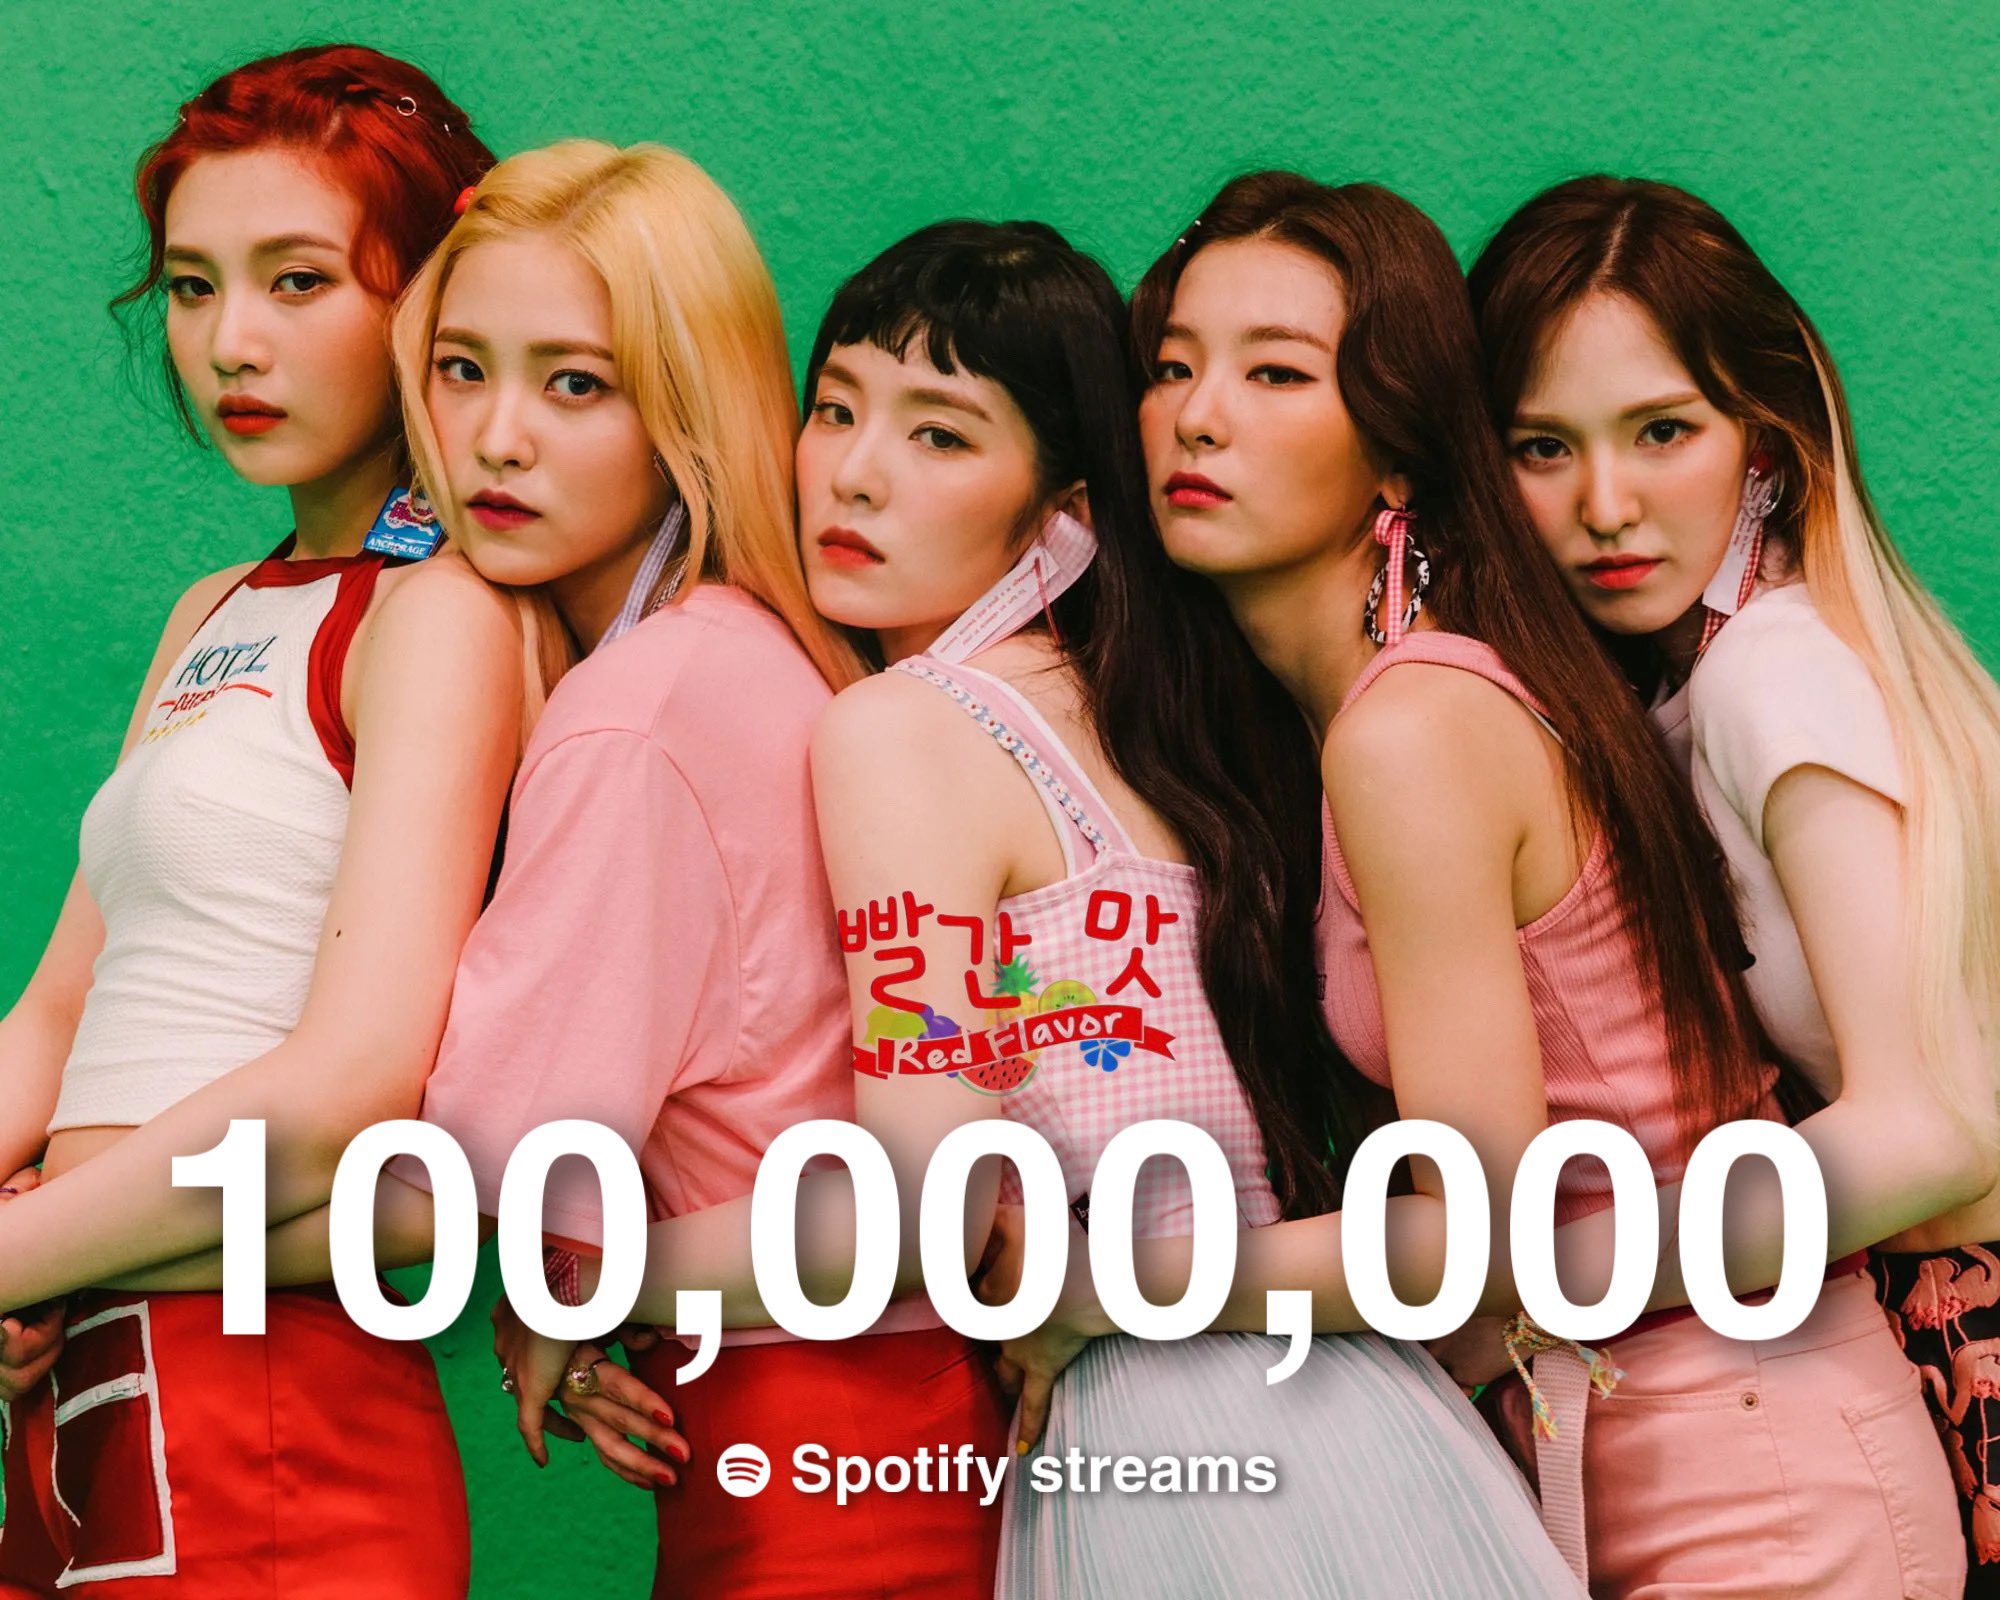 Red Velvet on Spotify on Flavor has reached 100 MILLION streams on Spotify! 🍉🍍🍊🥝🍇 This is Red Velvet's 4th song to this! 🥳 #RedVelvet #레드벨벳 https://t.co/li9H7D5Zup" / Twitter